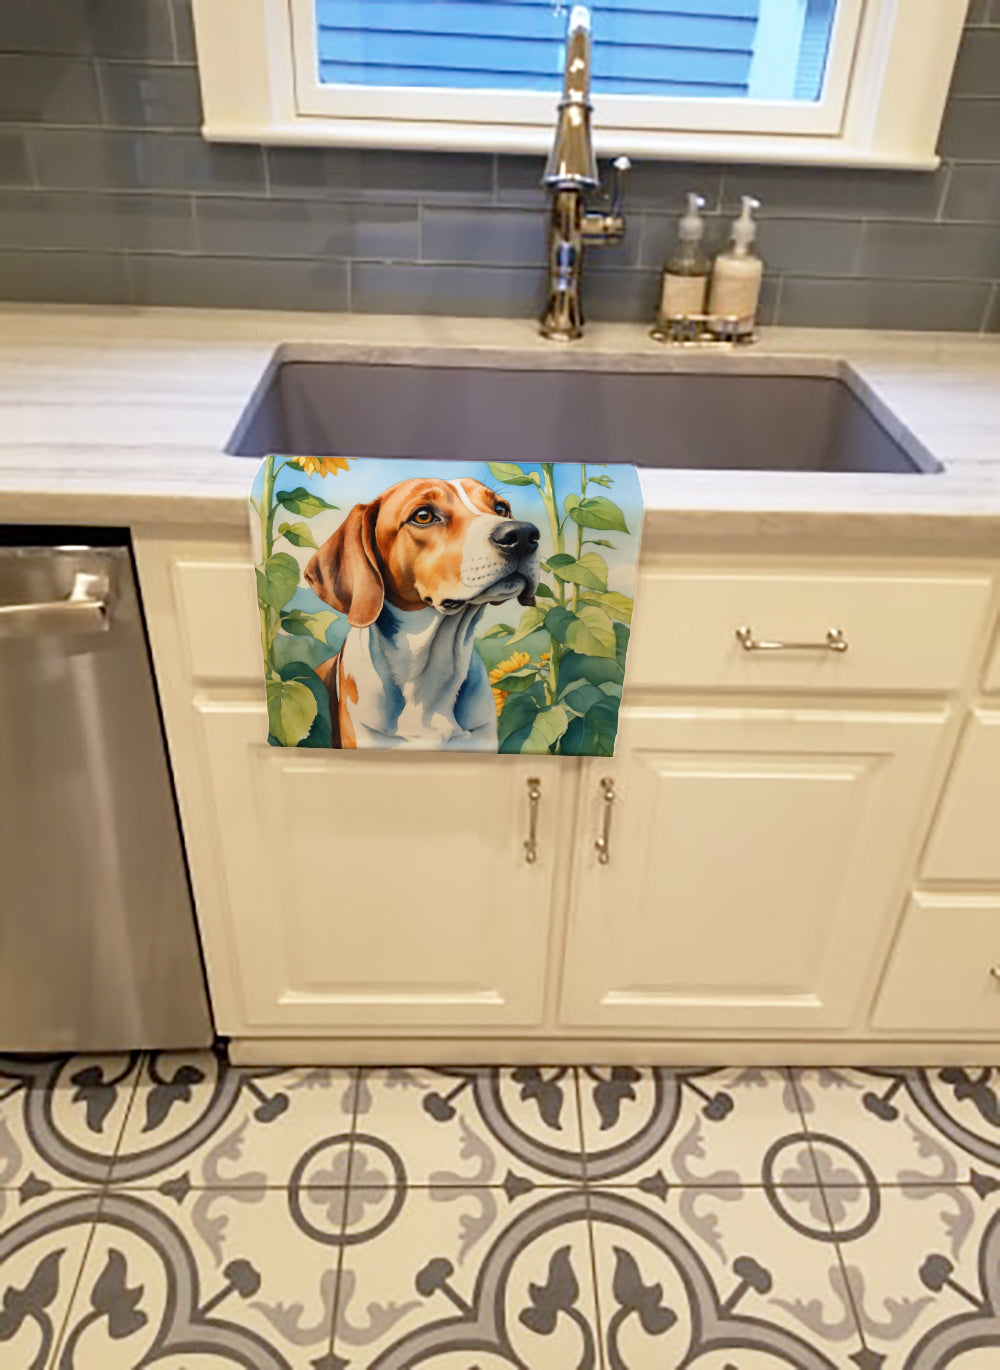 Buy this English Foxhound in Sunflowers Kitchen Towel